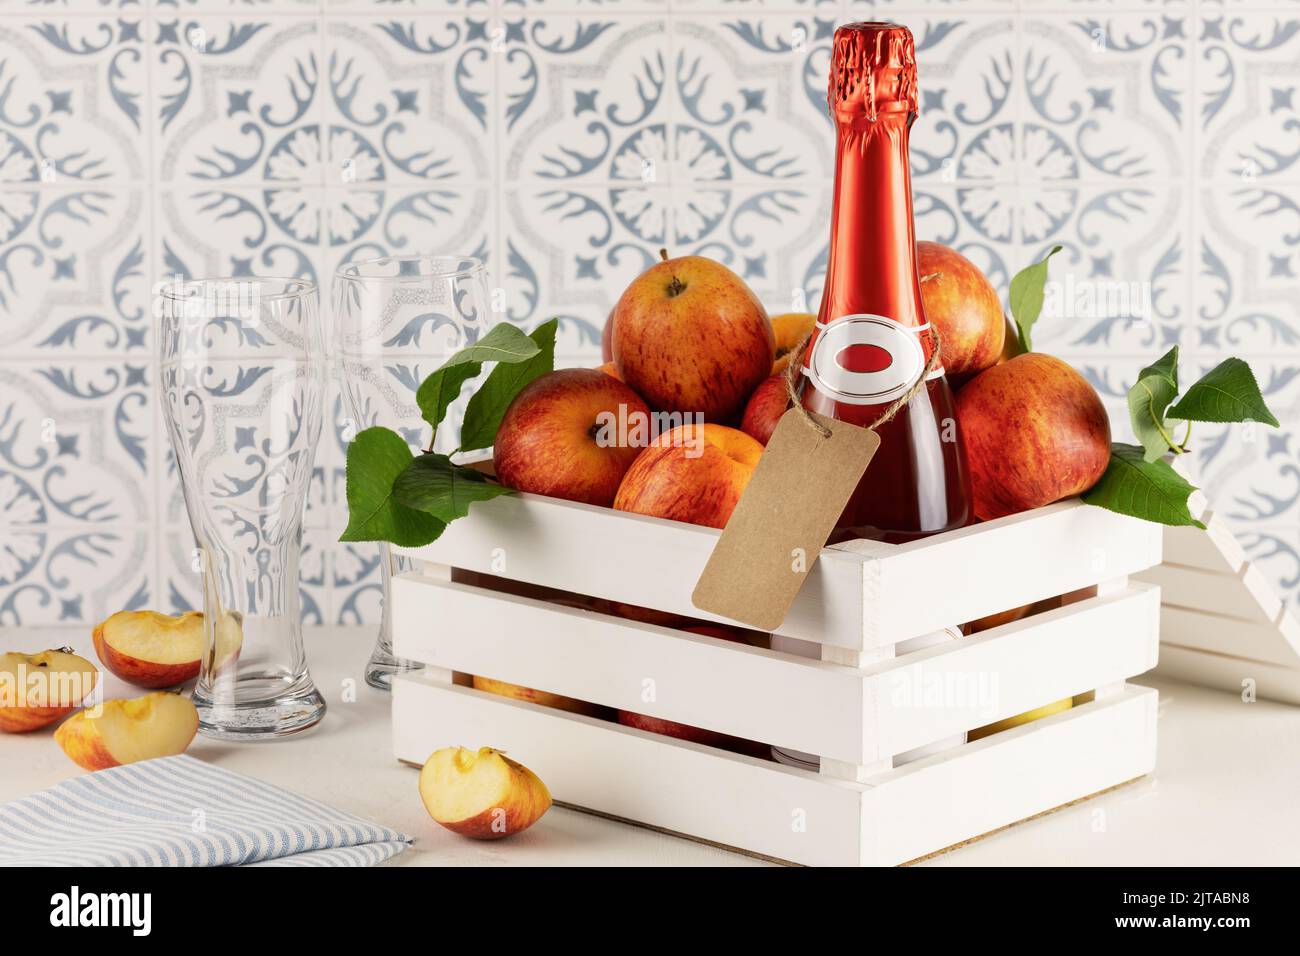 Apple cider drink or fermented fruit drink. Bottle with cider, glasses and red organic apples in a white wooden box on a kitchen table. Healthy eating Stock Photo